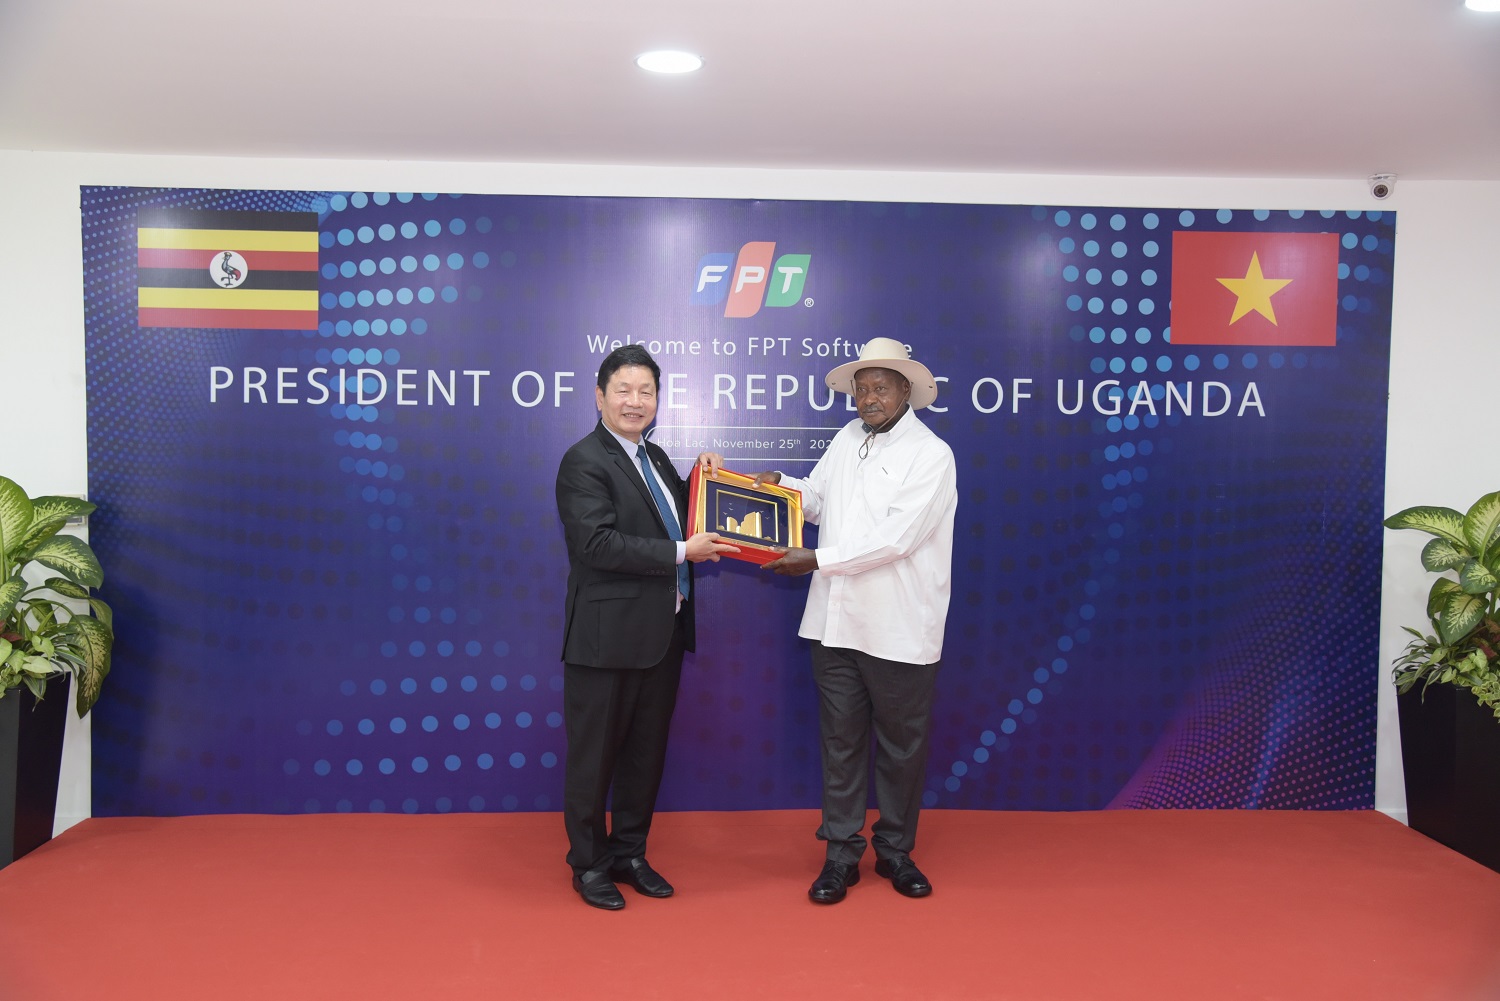 Mr. Truong Gia Binh, Chairman of FPT, presented a souvenir to the President of Uganda